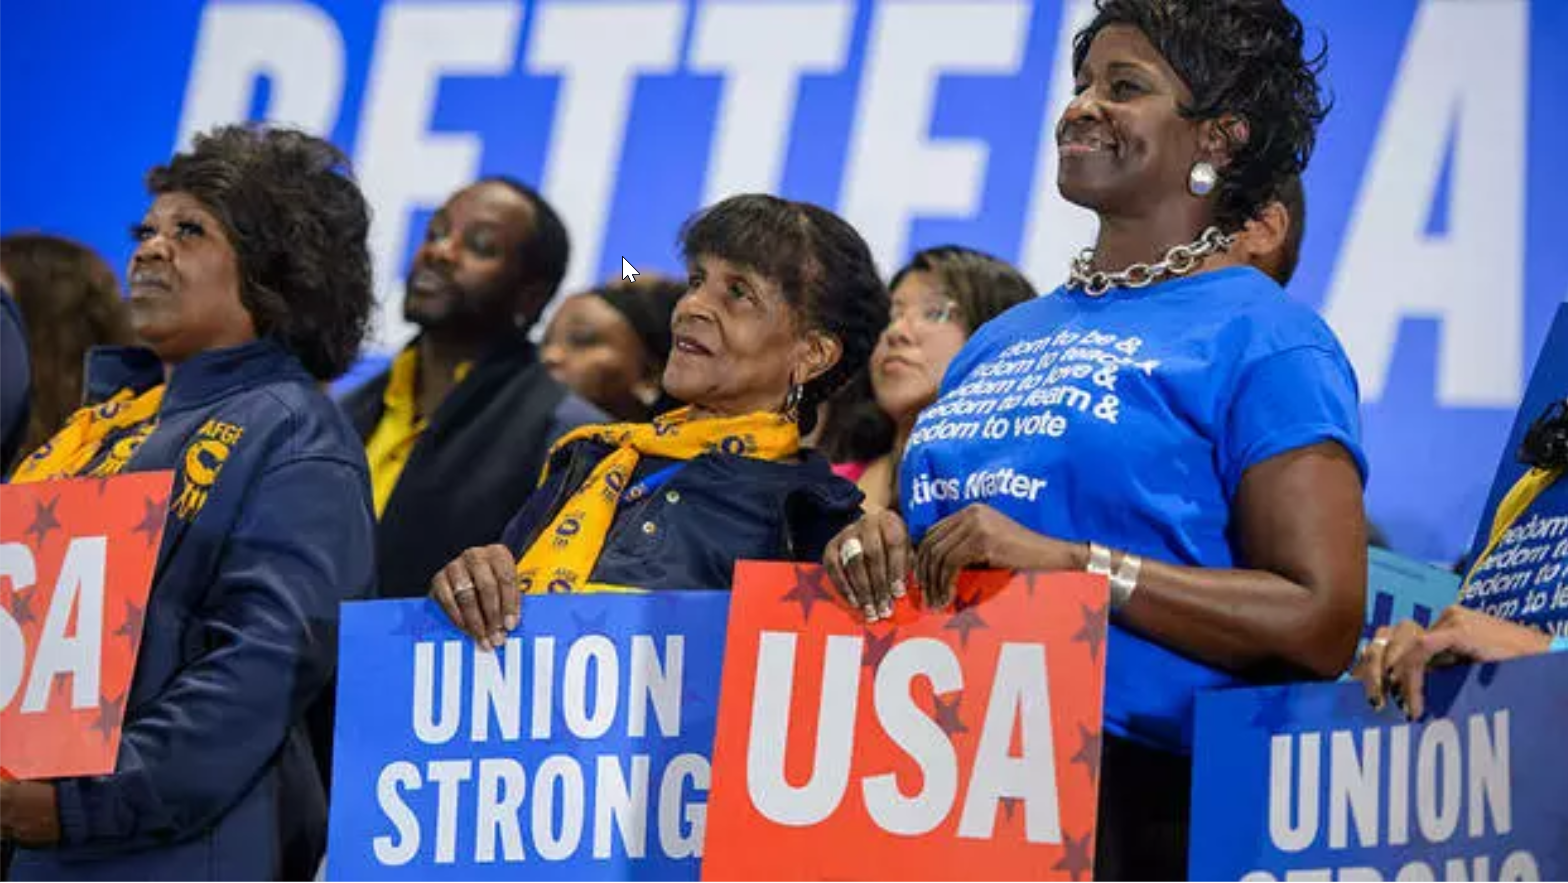 Union members look on during a rally for the midterm elections. They are holding signs that say 